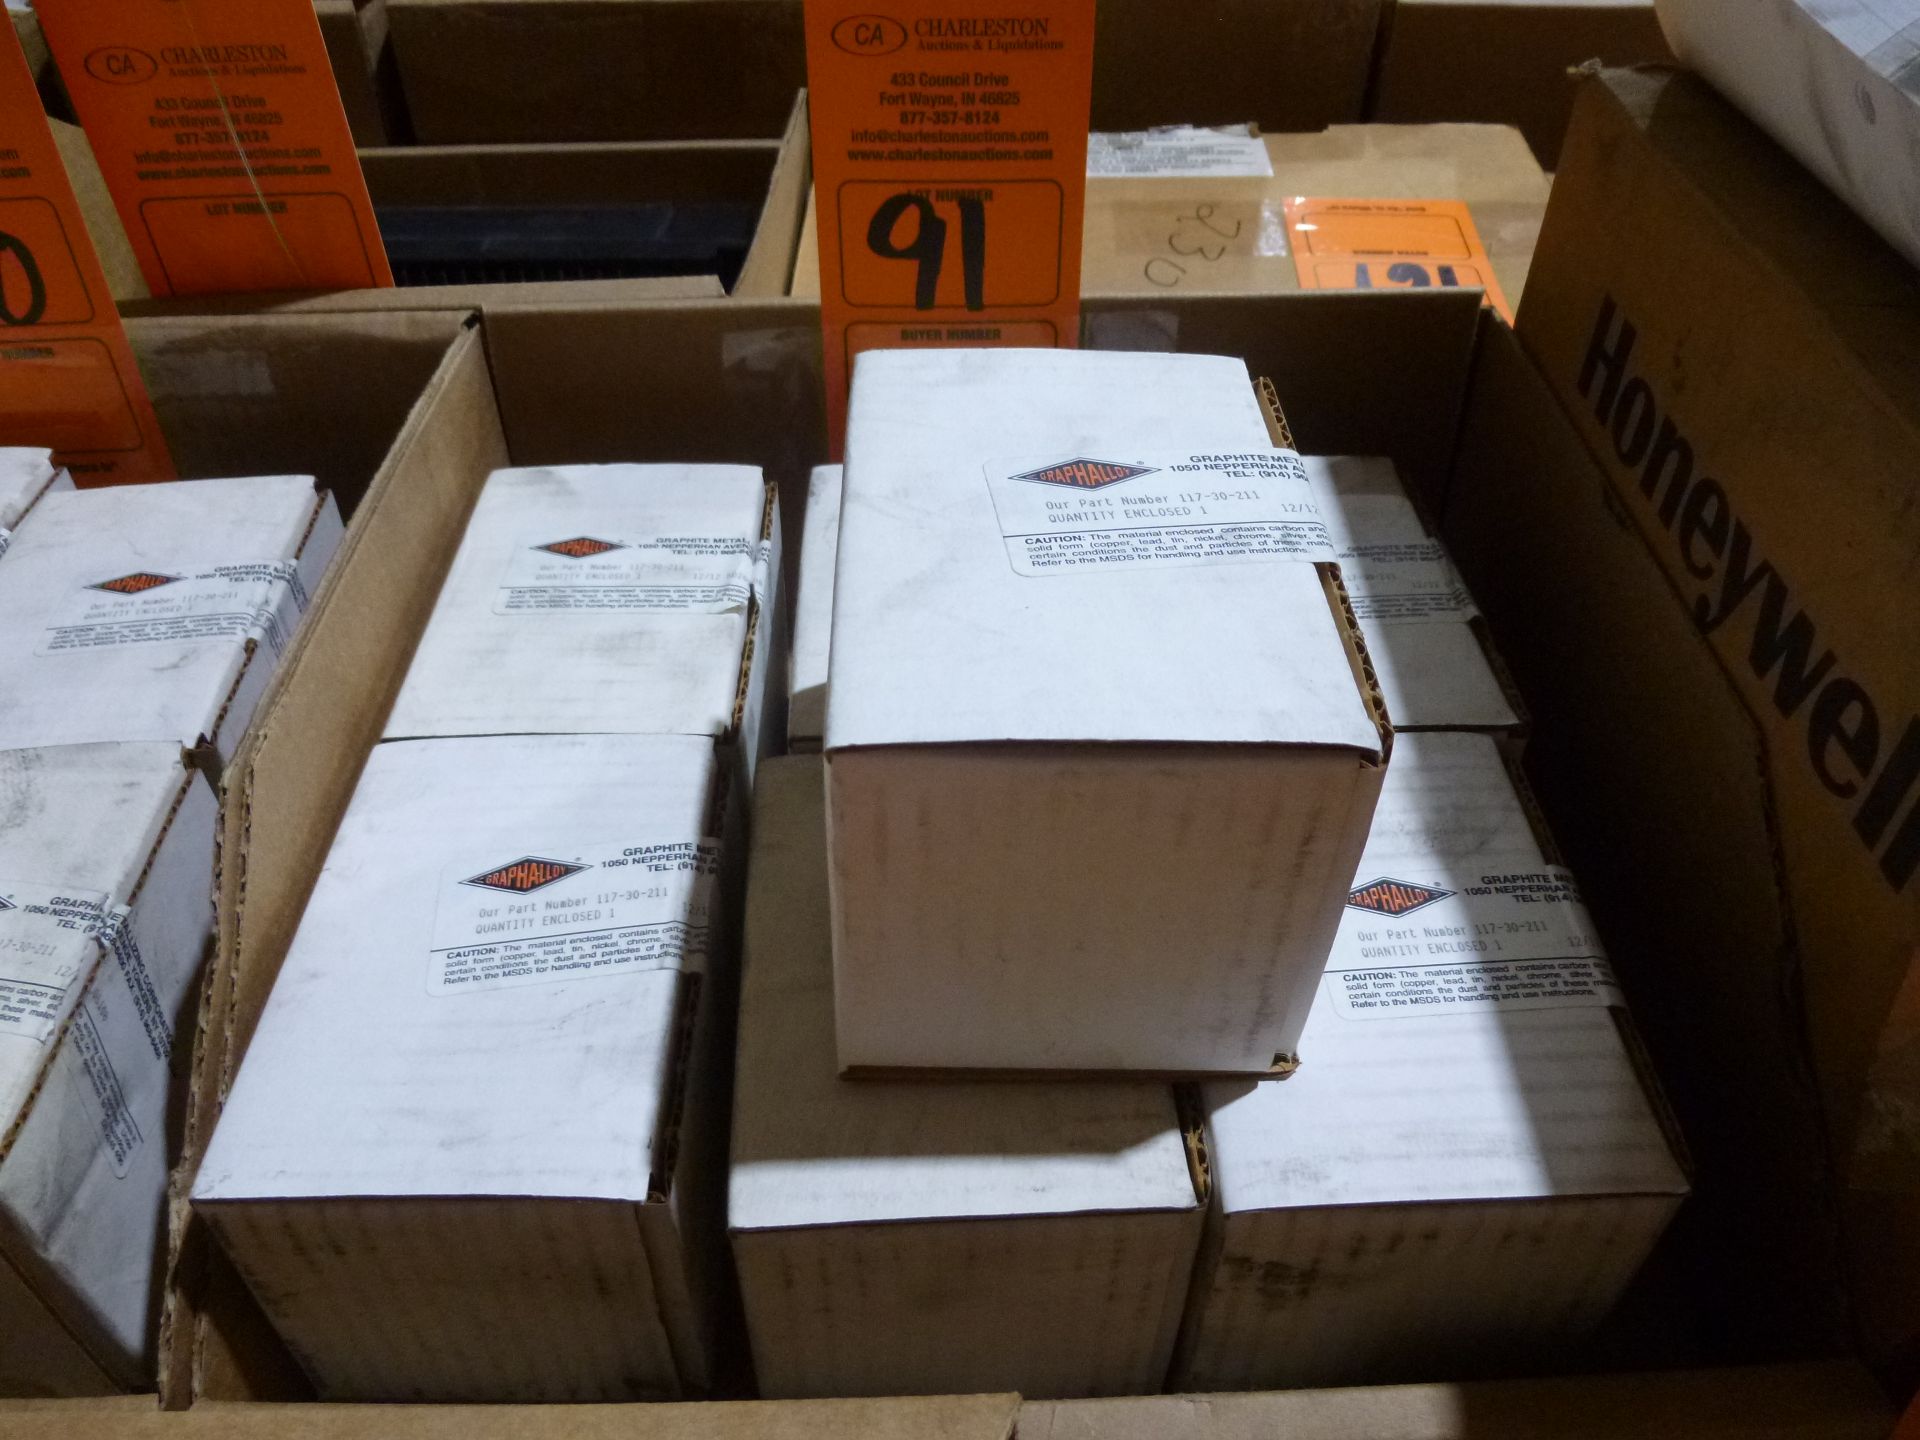 Qty 6 Graphalloy part number 117-30-211, new in boxes, as always with Brolyn LLC auctions, all